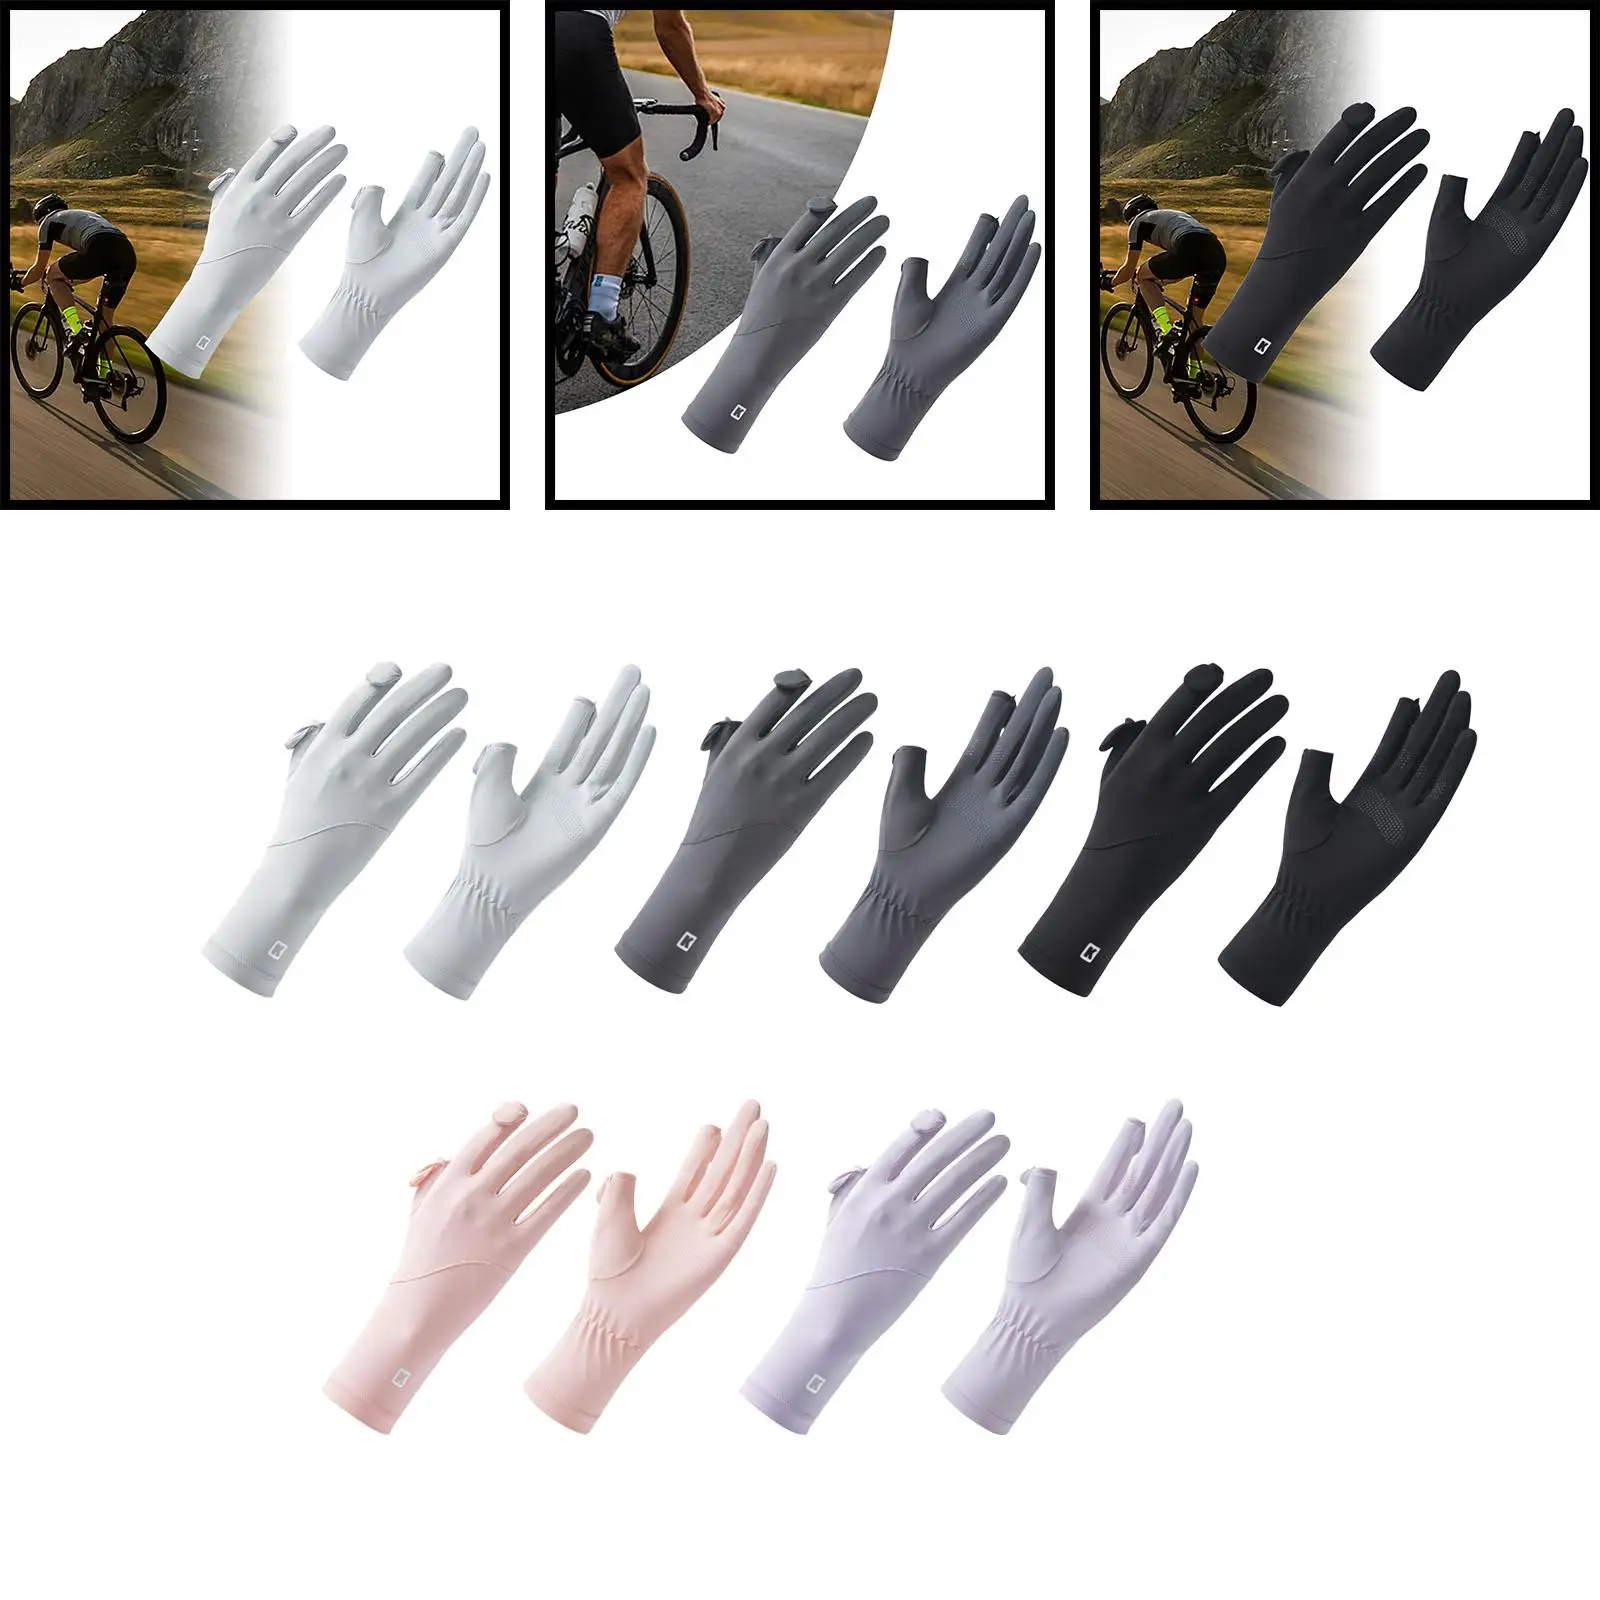 Sun Protection Gloves for Women Sunblock Gloves Summer Non Slip Extended Wrist Driving Gloves for Cycling Outdoor Activities